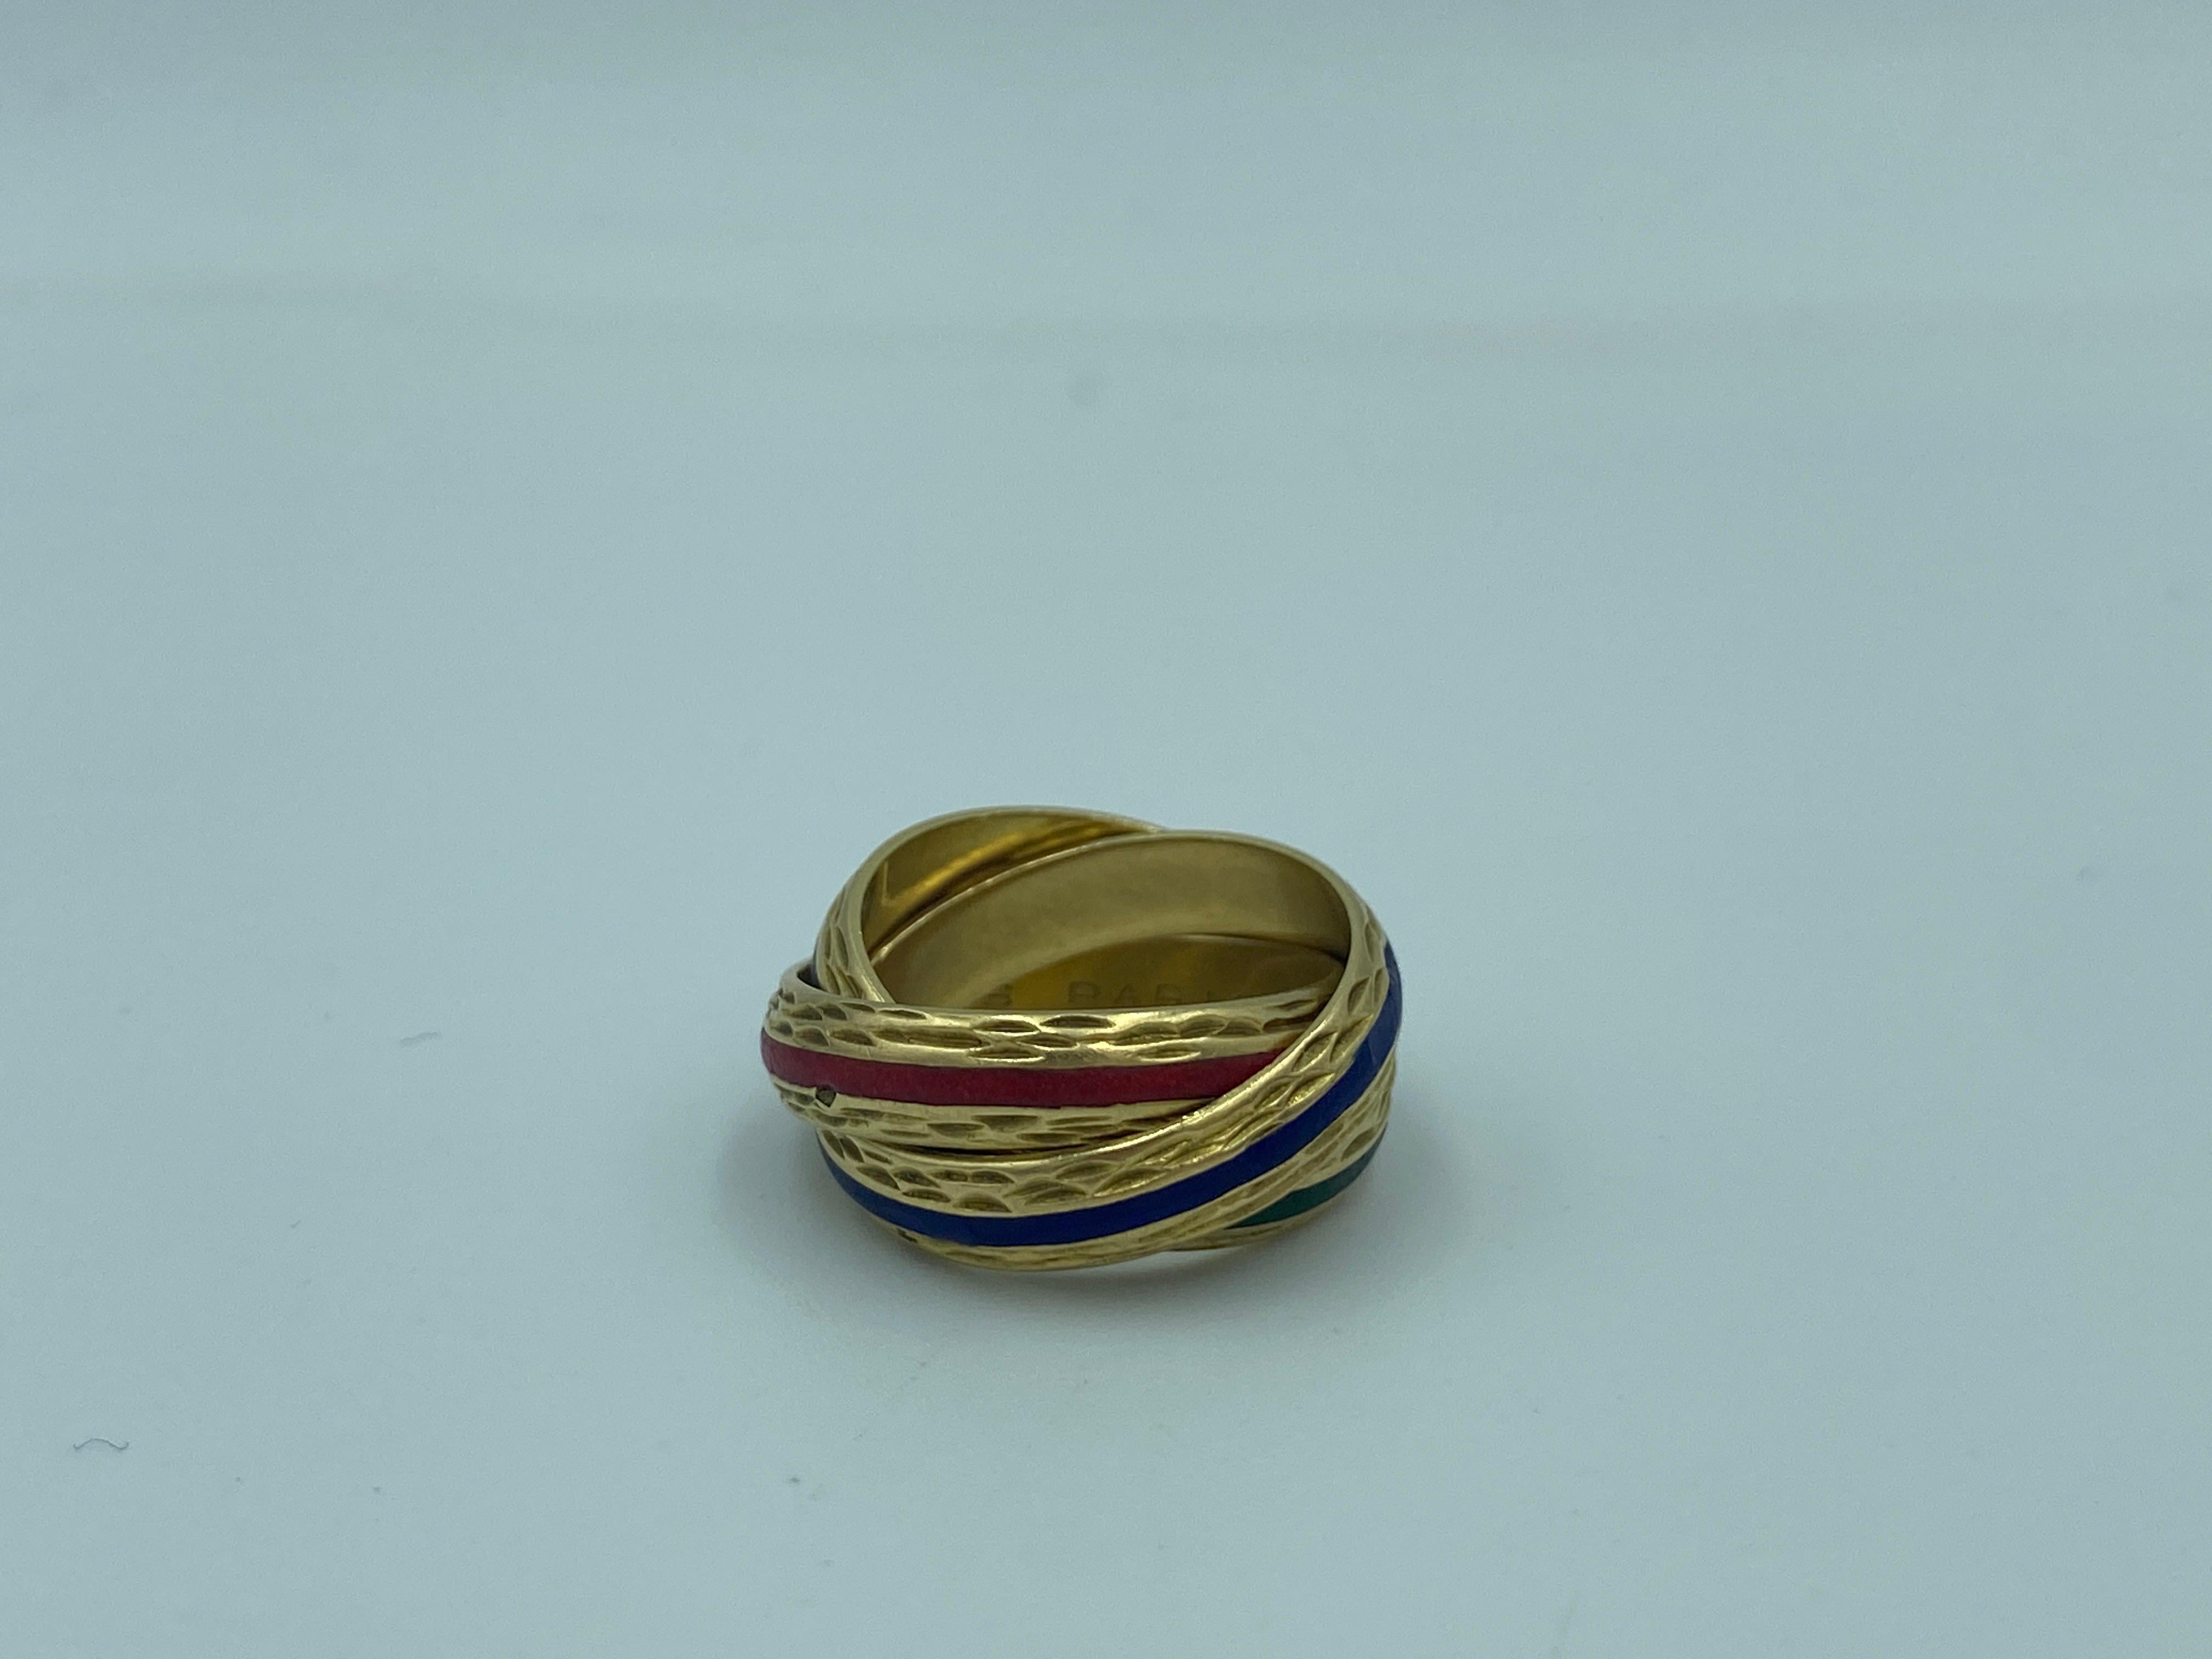 This graceful 1980s Hermes 18 carat gold trinity ring is a classic beauty. Each band has a different colour enamel, red, green and blue. It is a ring which you will not want to take off.